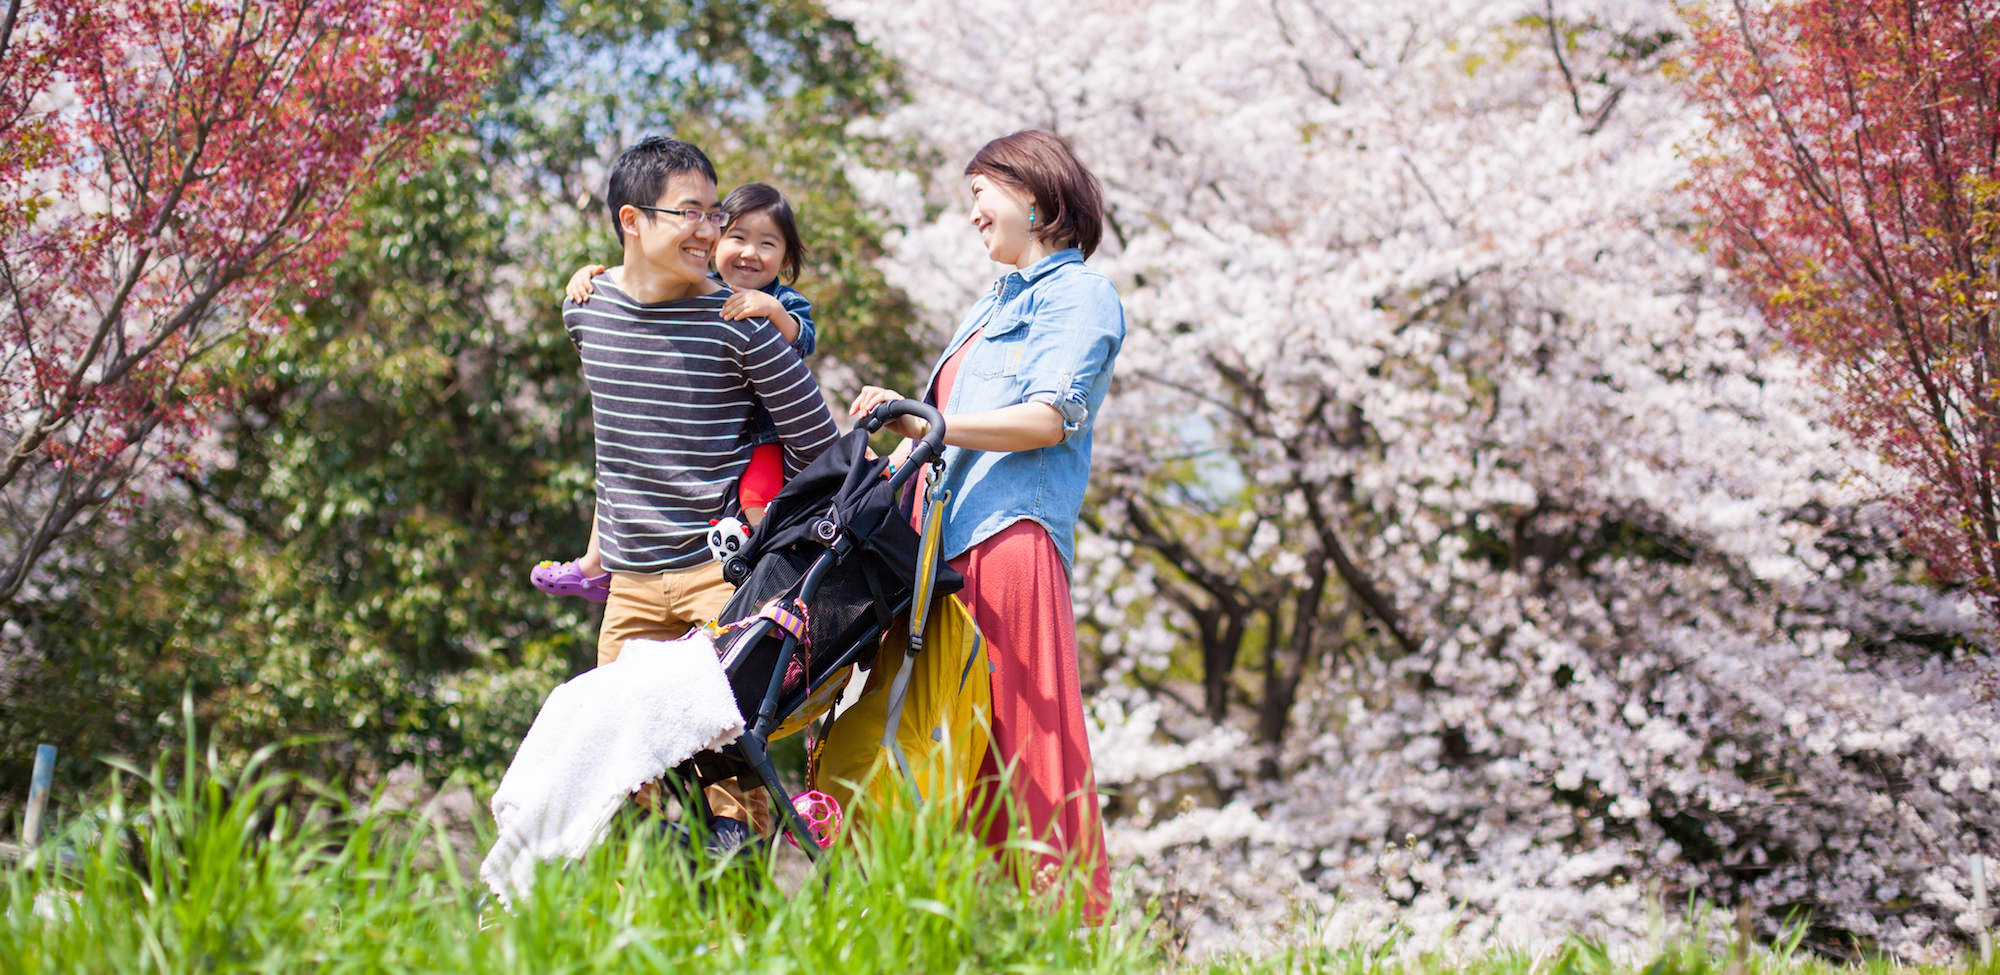 Family vacation photo of a family strolling along the river canal during cherry blossom season in Japan